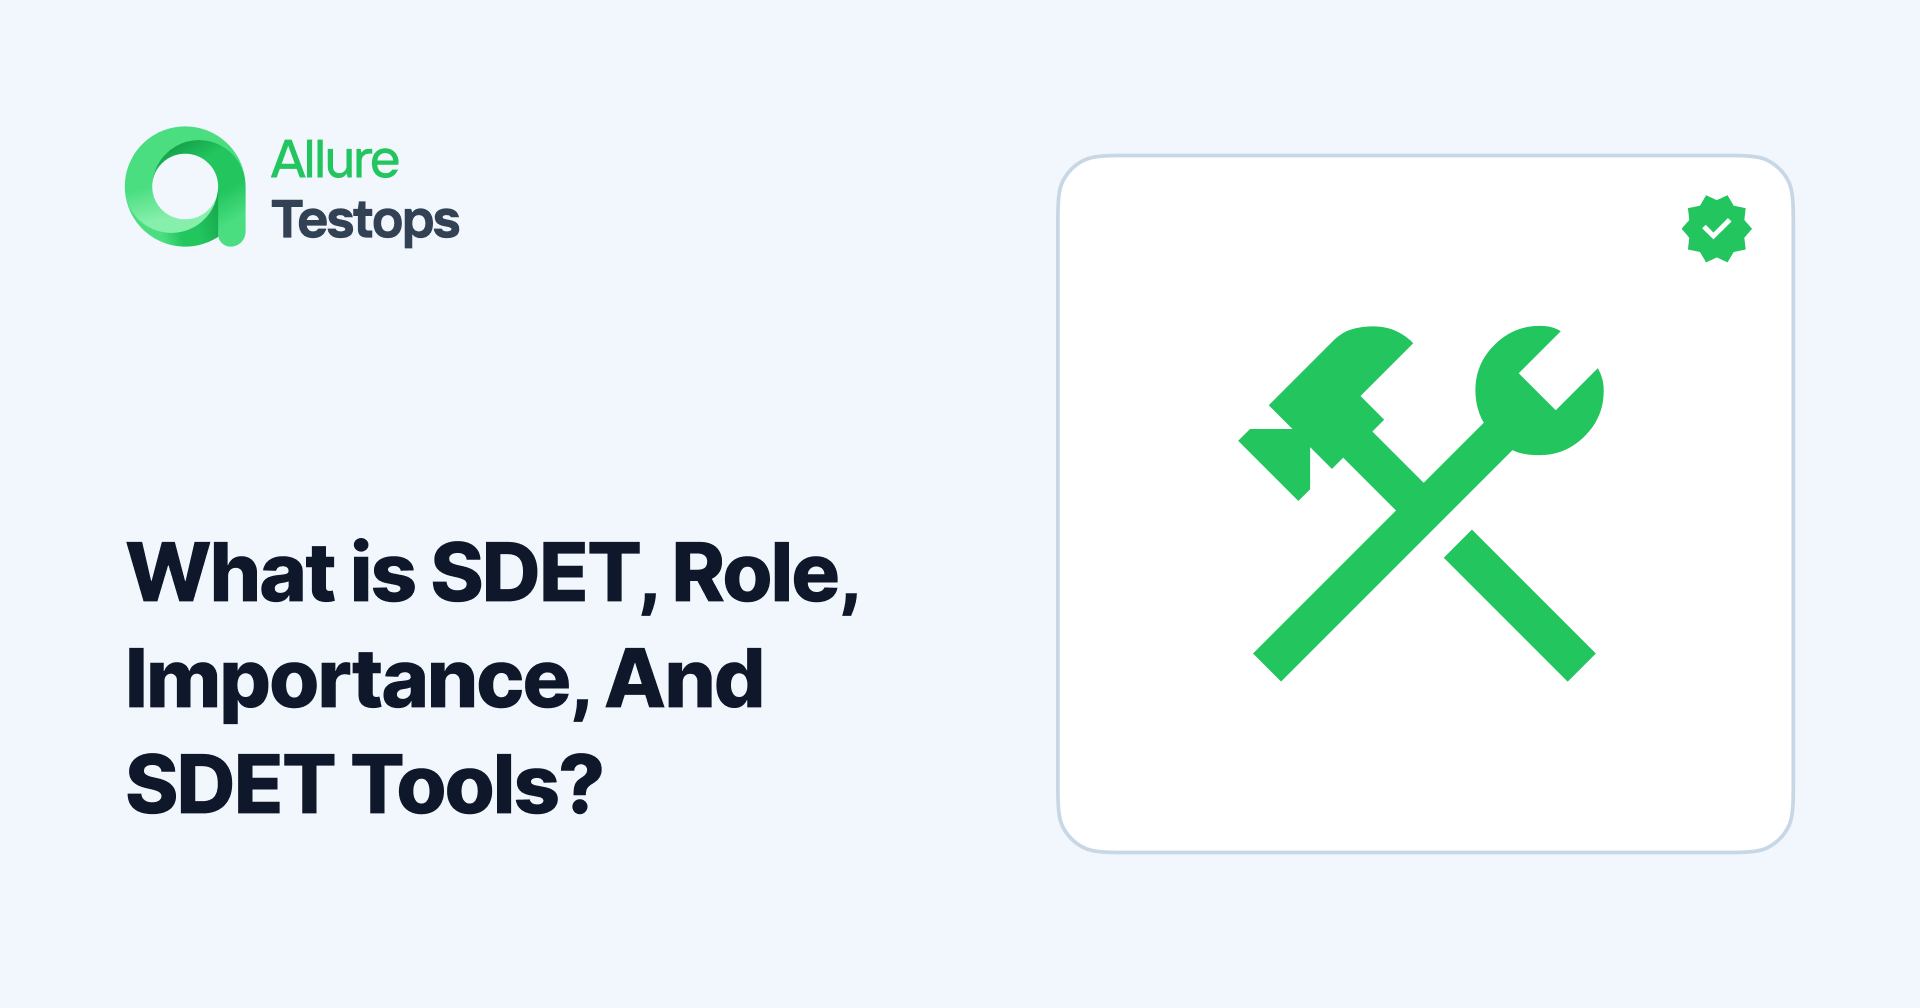 What is SDET, Role, Importance, And SDET Tools?